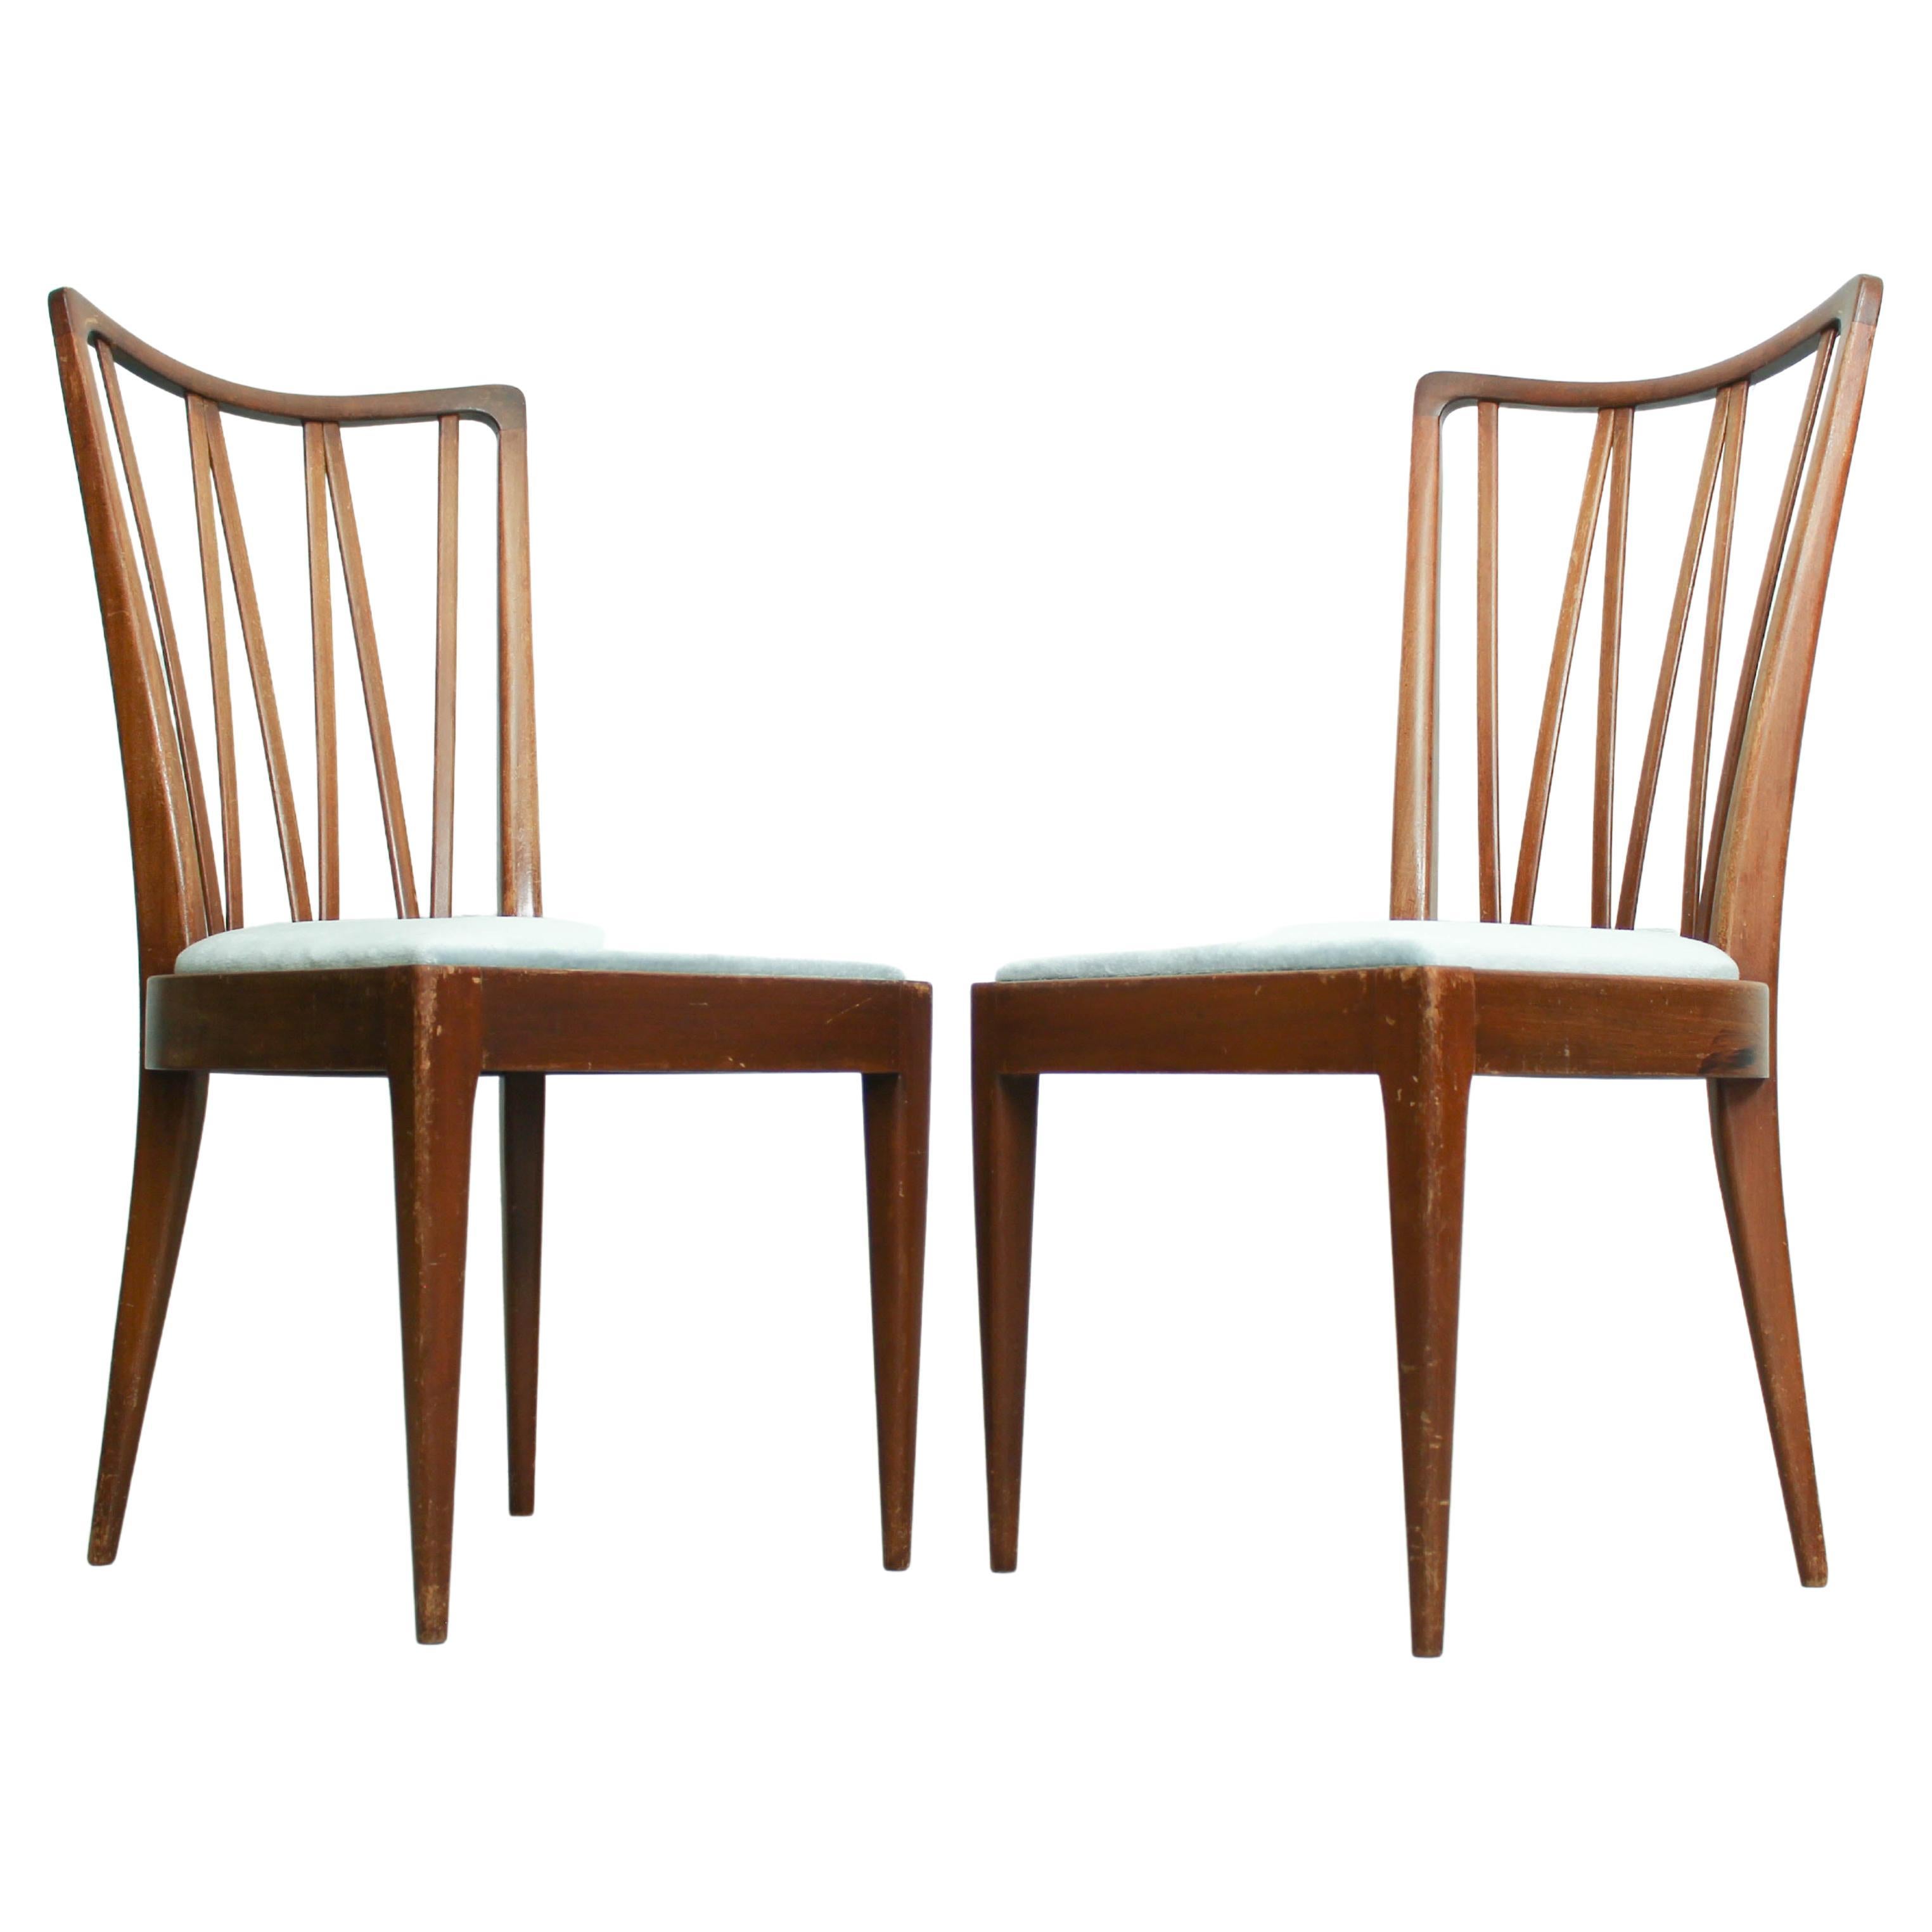 2 Dining Chairs designed by A. A. Patijn for Zijlstra Furniture, The Netherlands